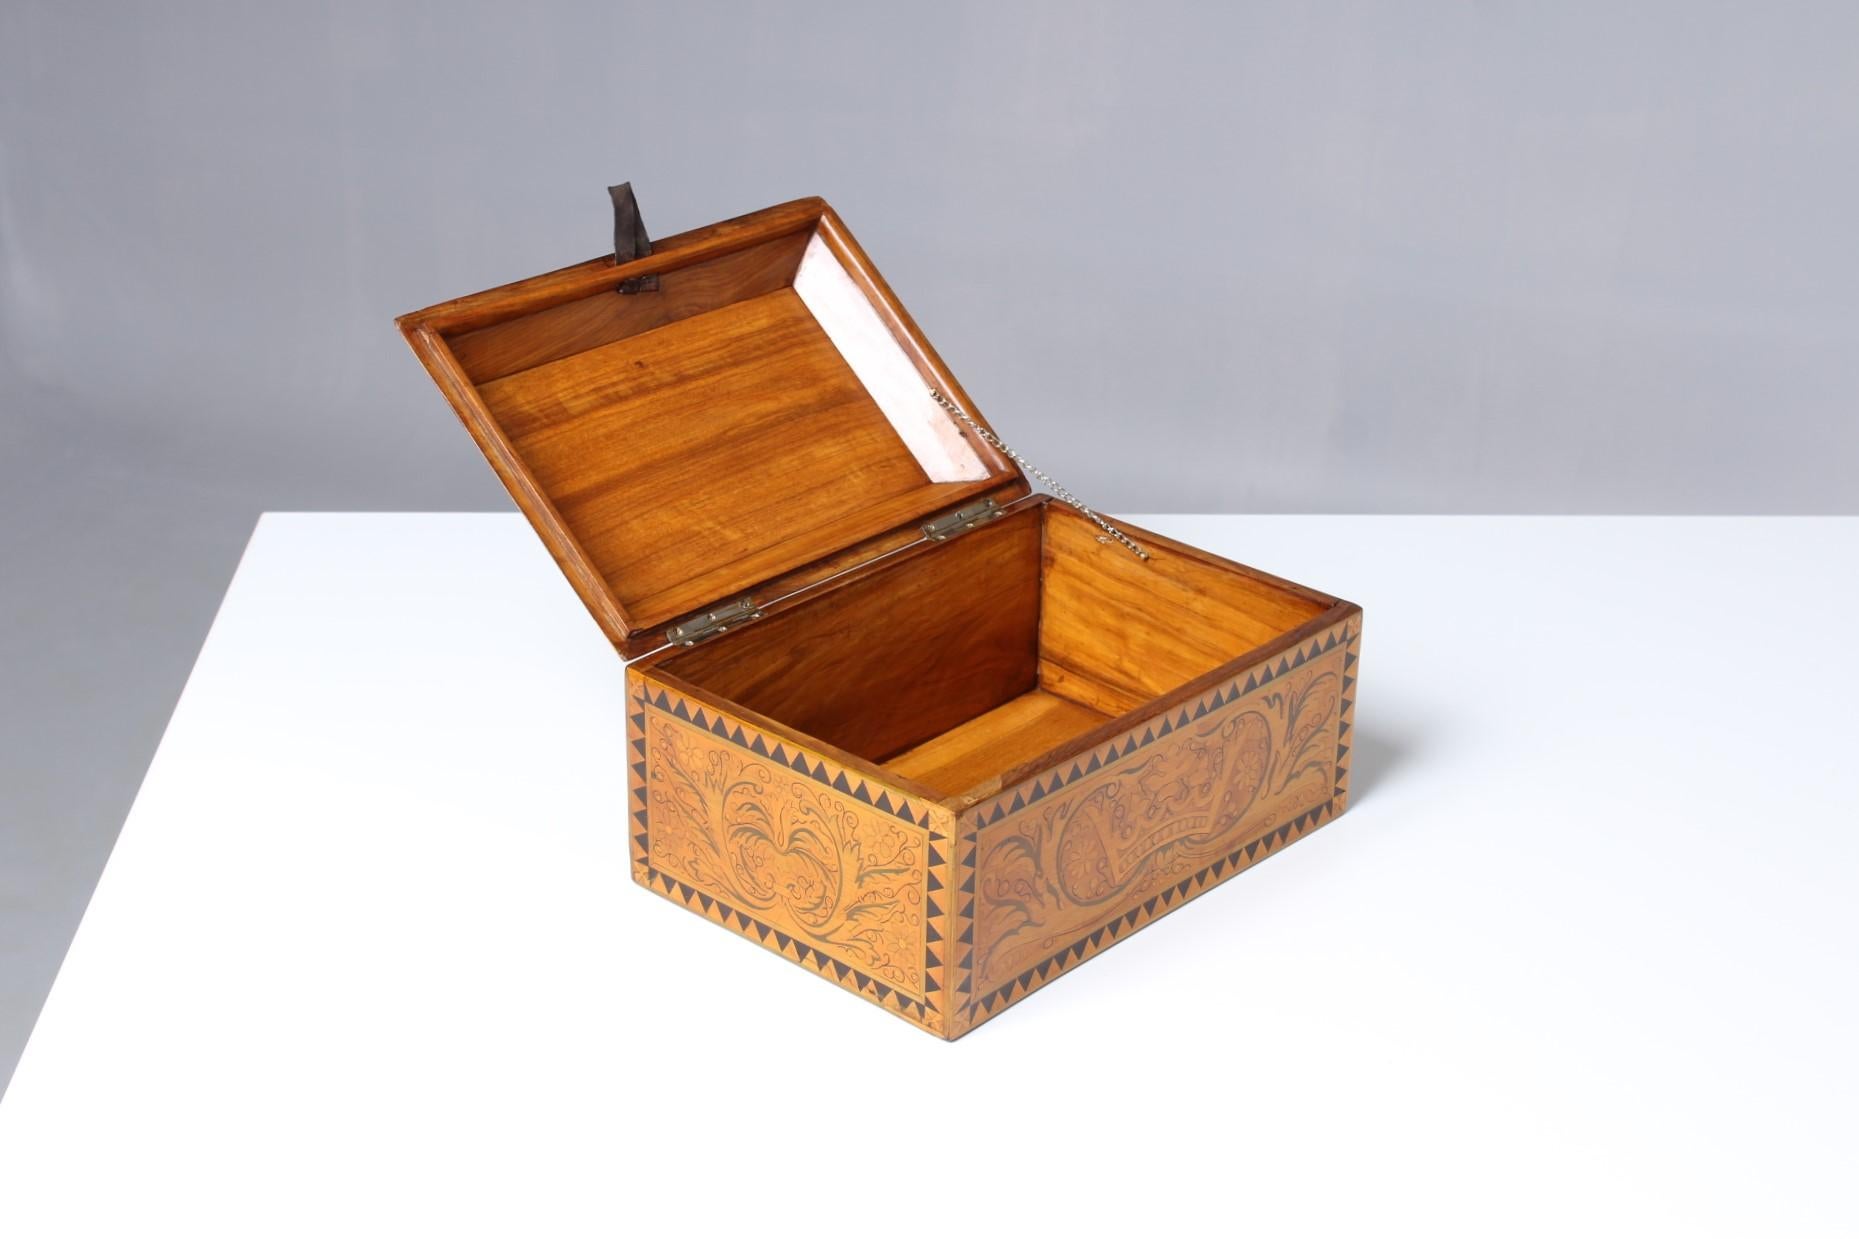 20th Century Inlaid Jewelry or Cigar Wooden Box, Marquetry, Germany, circa 1900